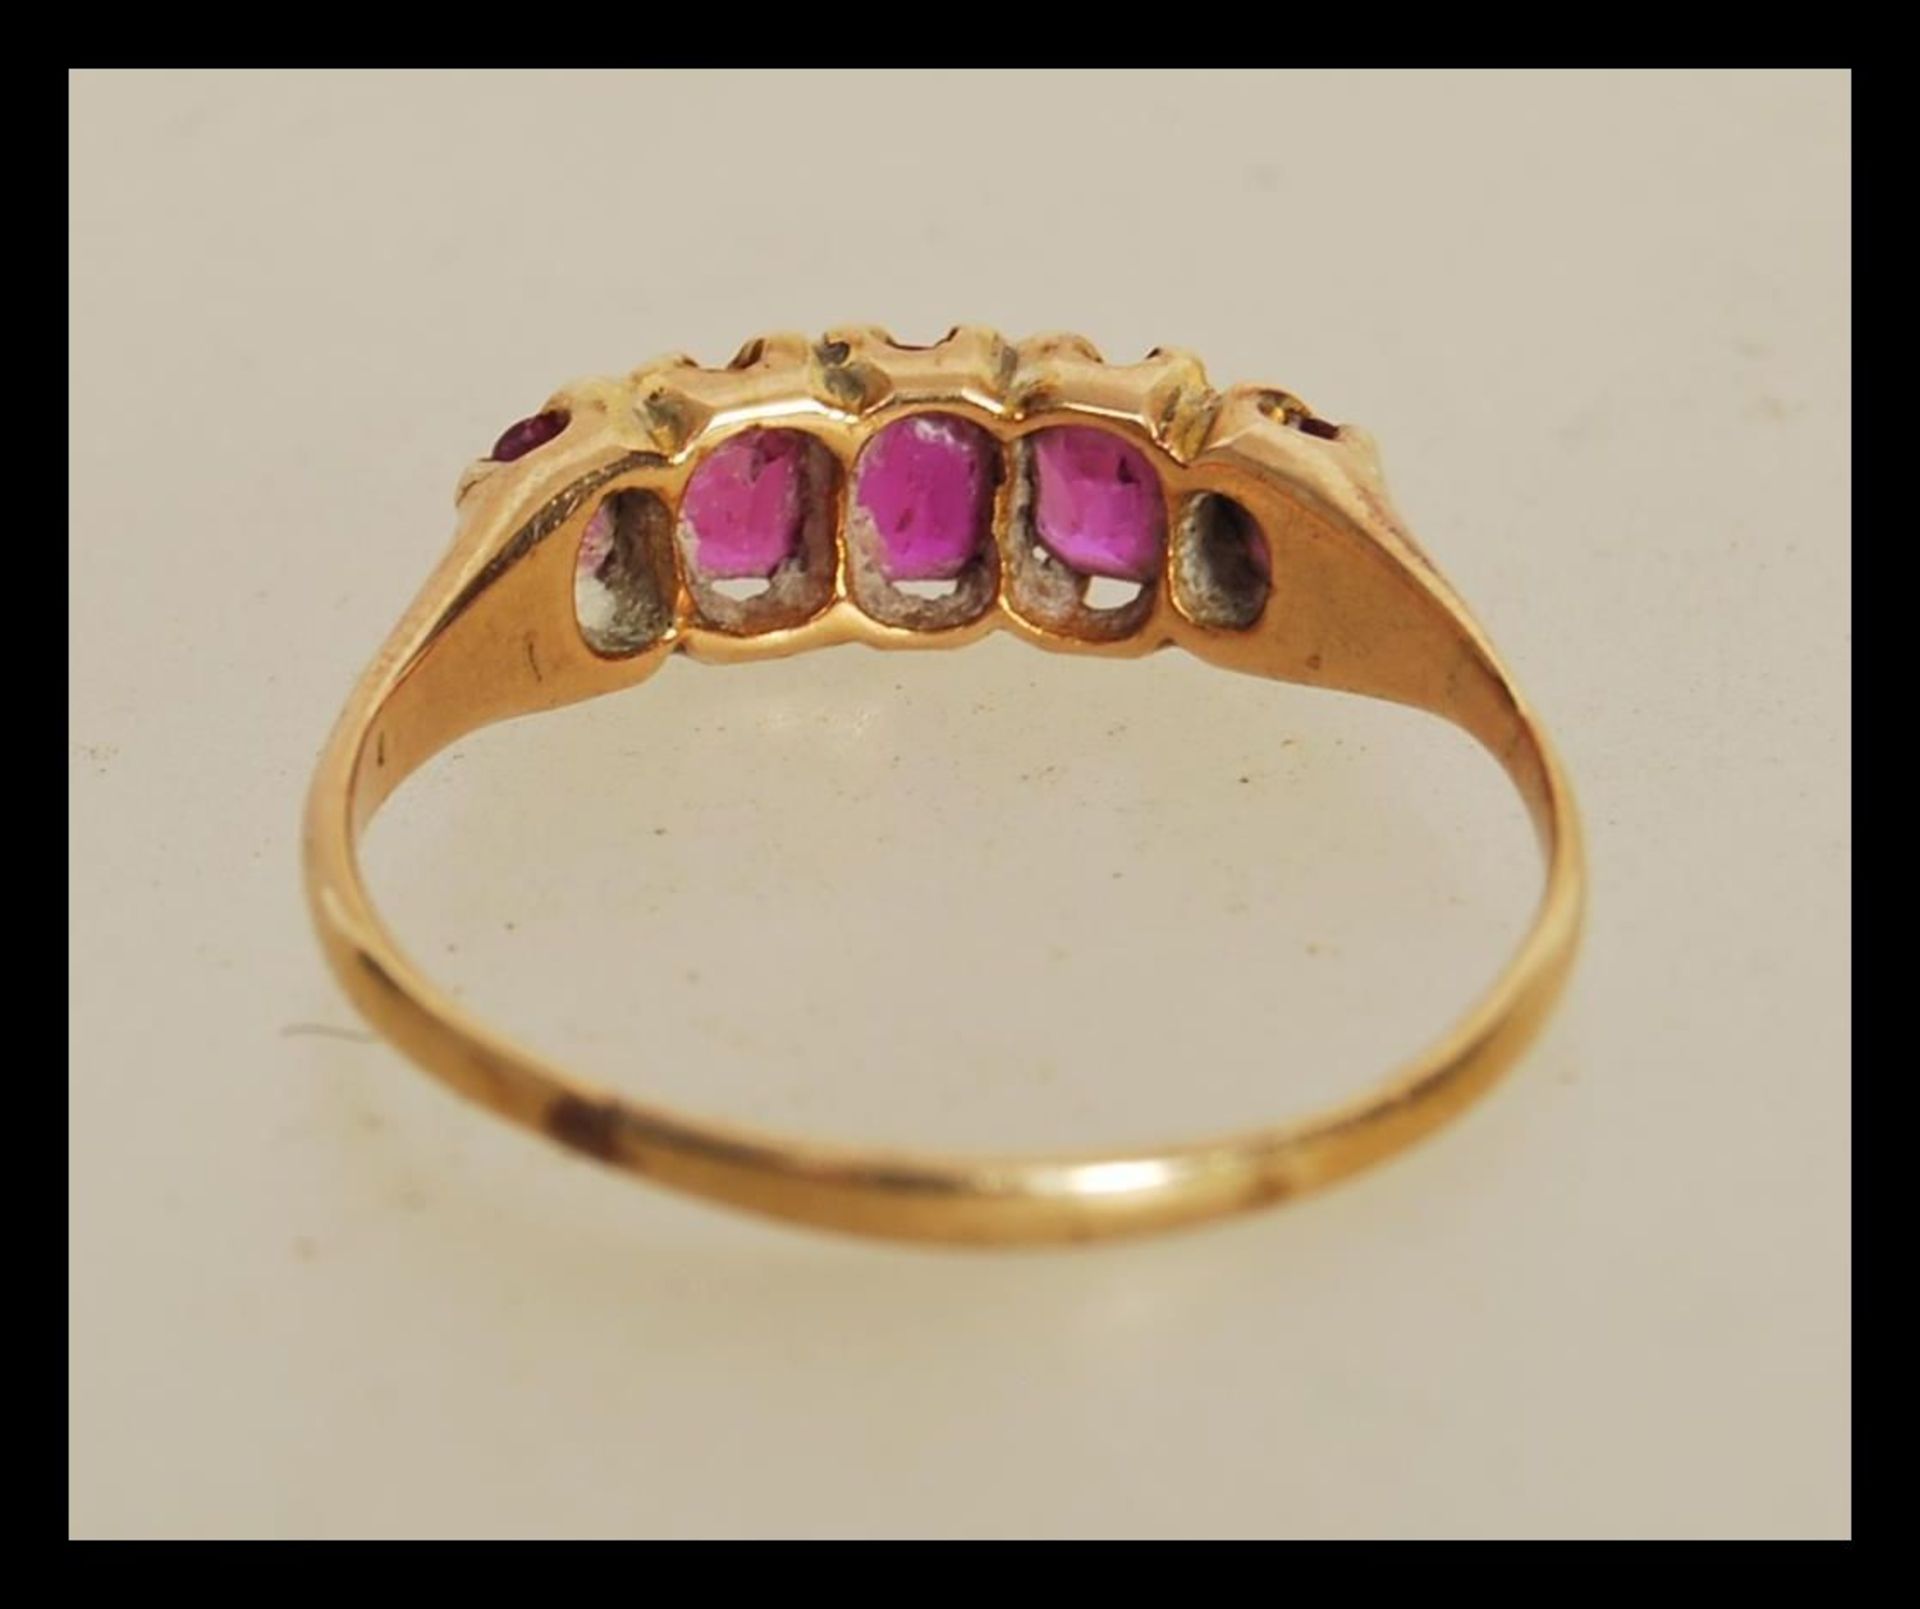 An early 20th Century 18ct gold ring prong set with five rectangular cut pink stones. Unmarked but - Image 3 of 3